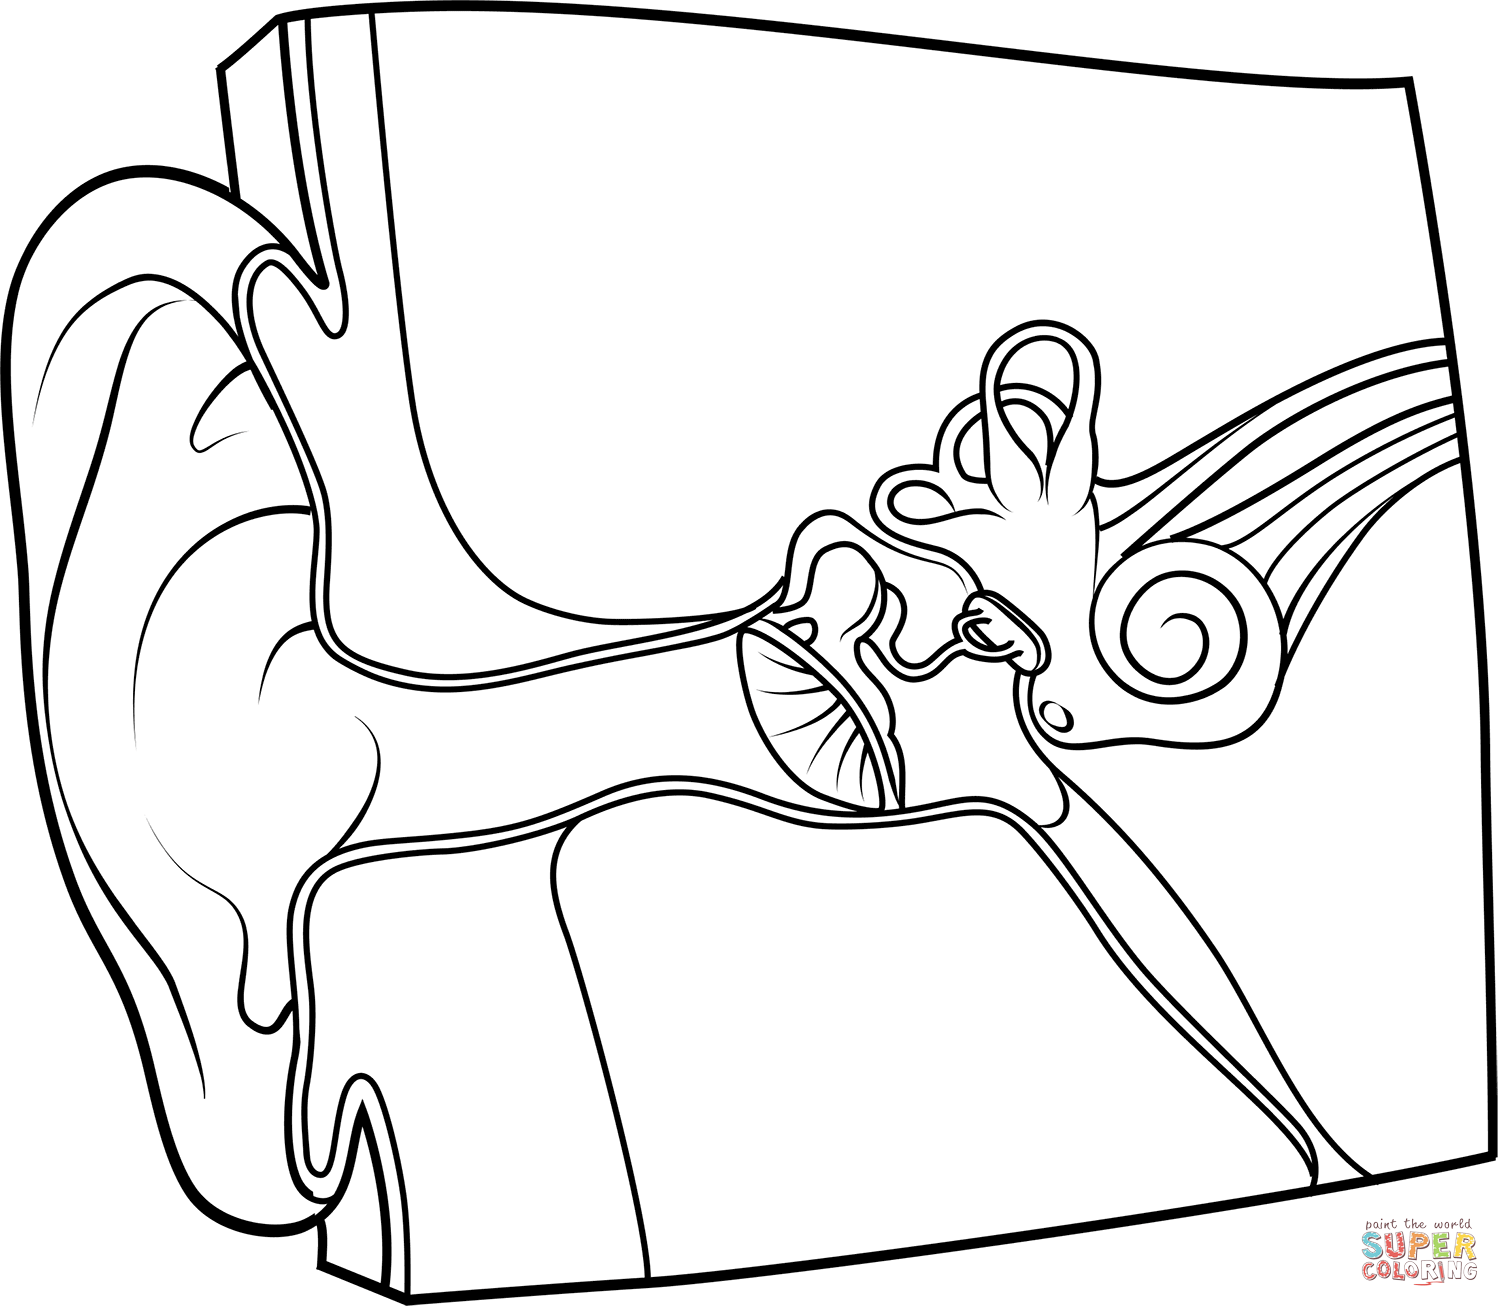 Ear anatomy coloring page free printable coloring pages